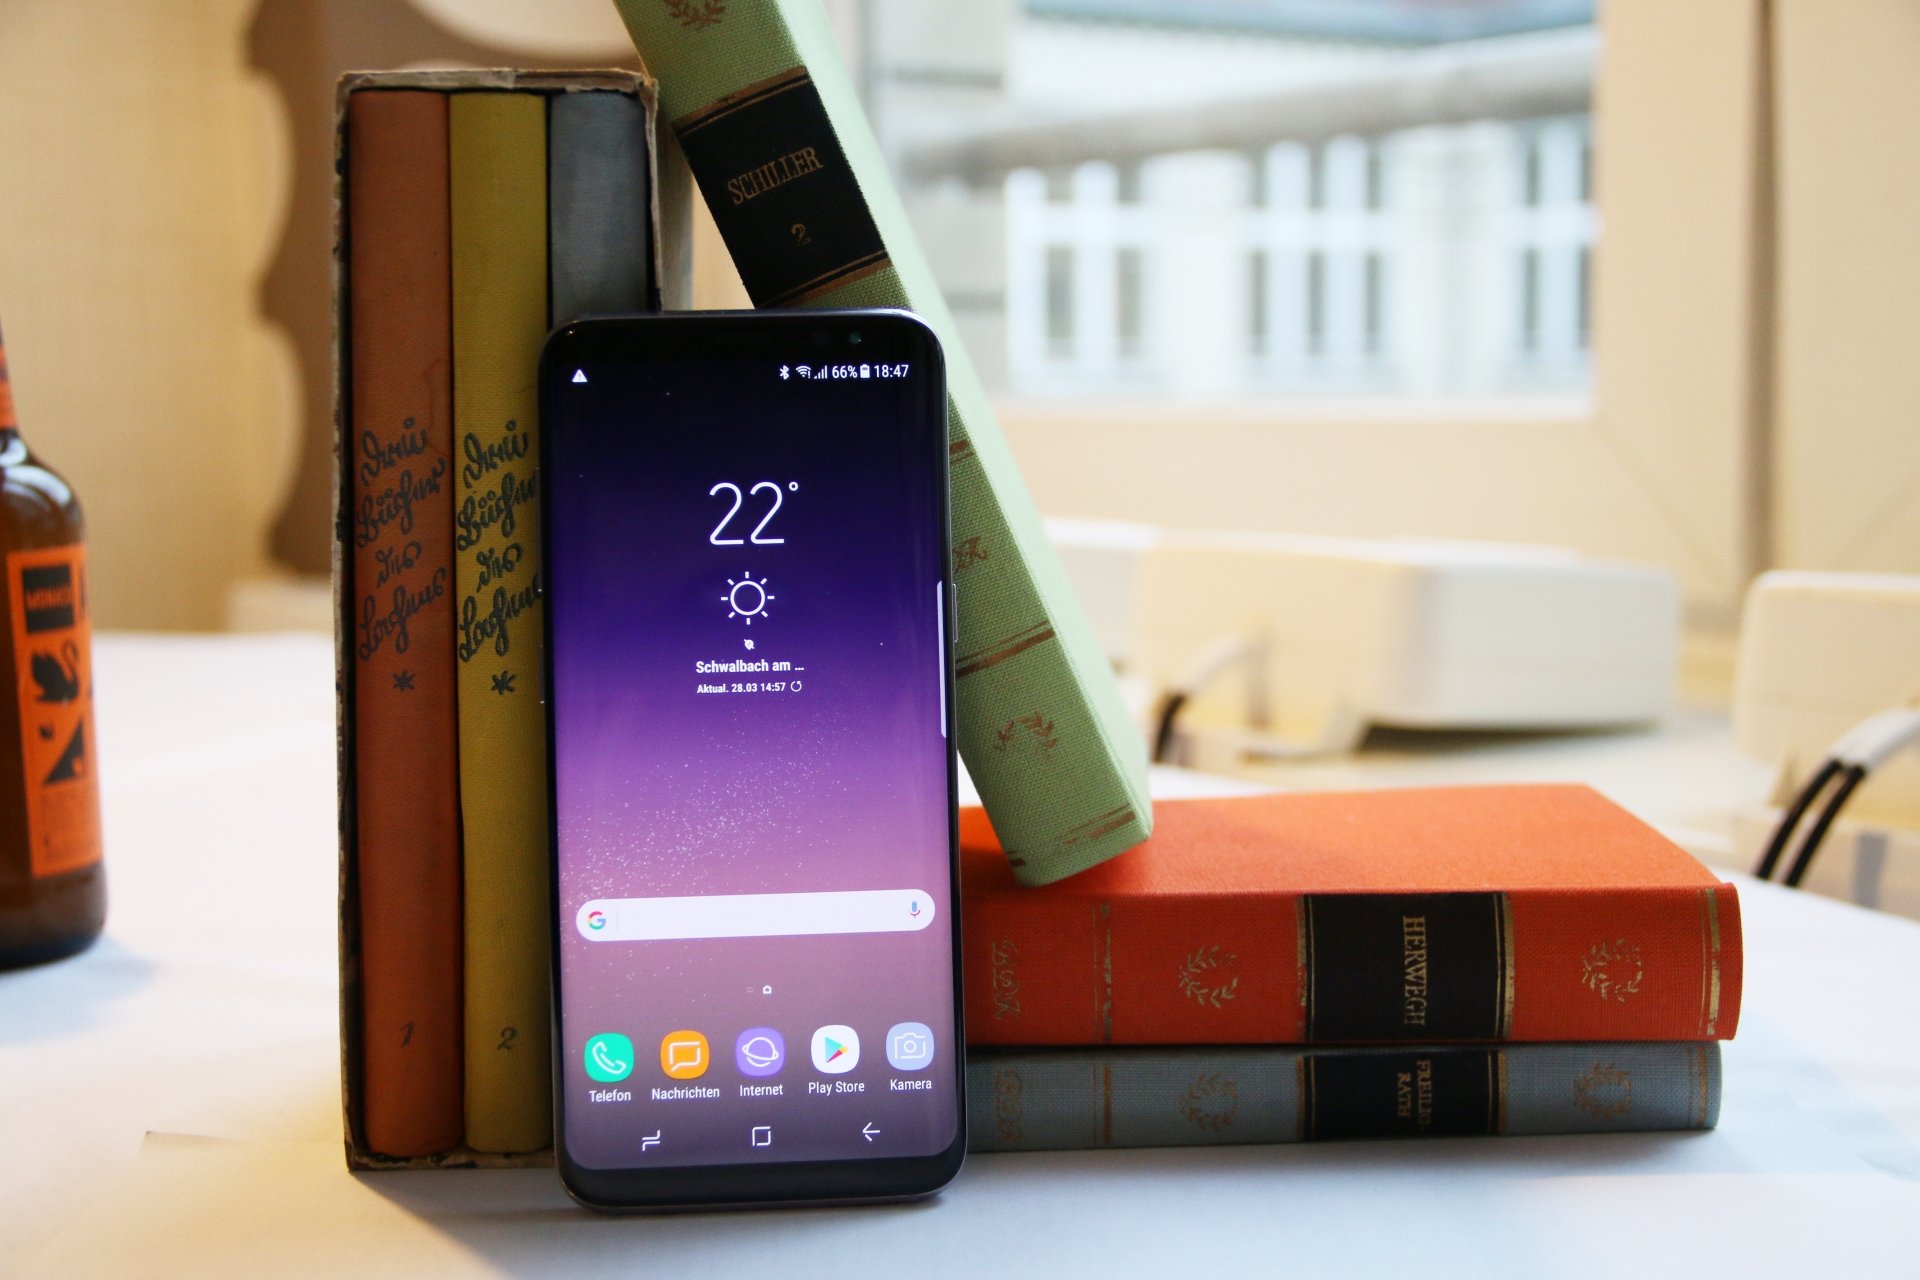 Download the wallpapers and ringtone of the new Galaxy S8